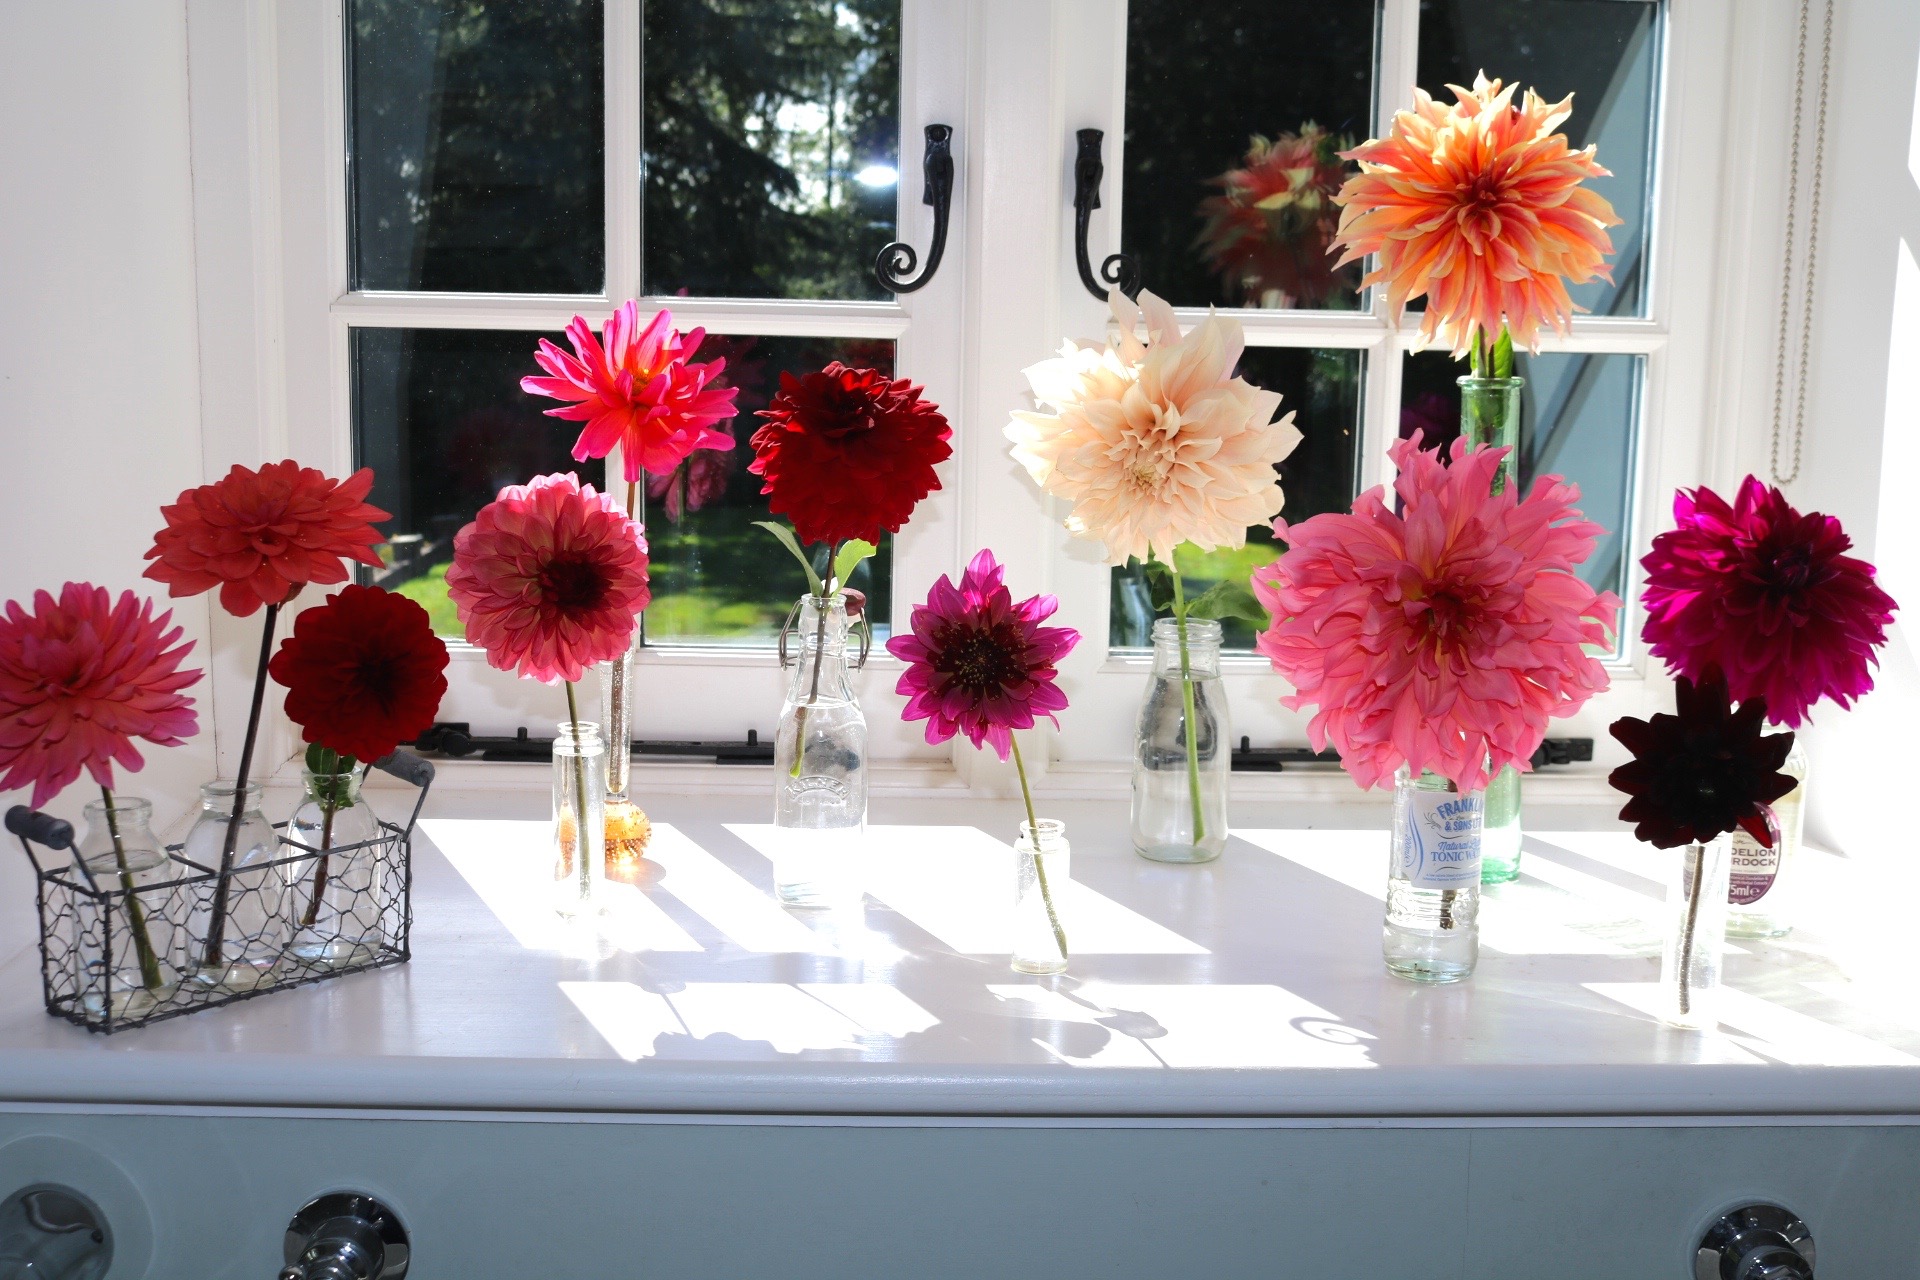 Decorating With Dahlias Simple Ideas To Try At Home The Tea Break Gardener,United Airlines Baggage Fee International